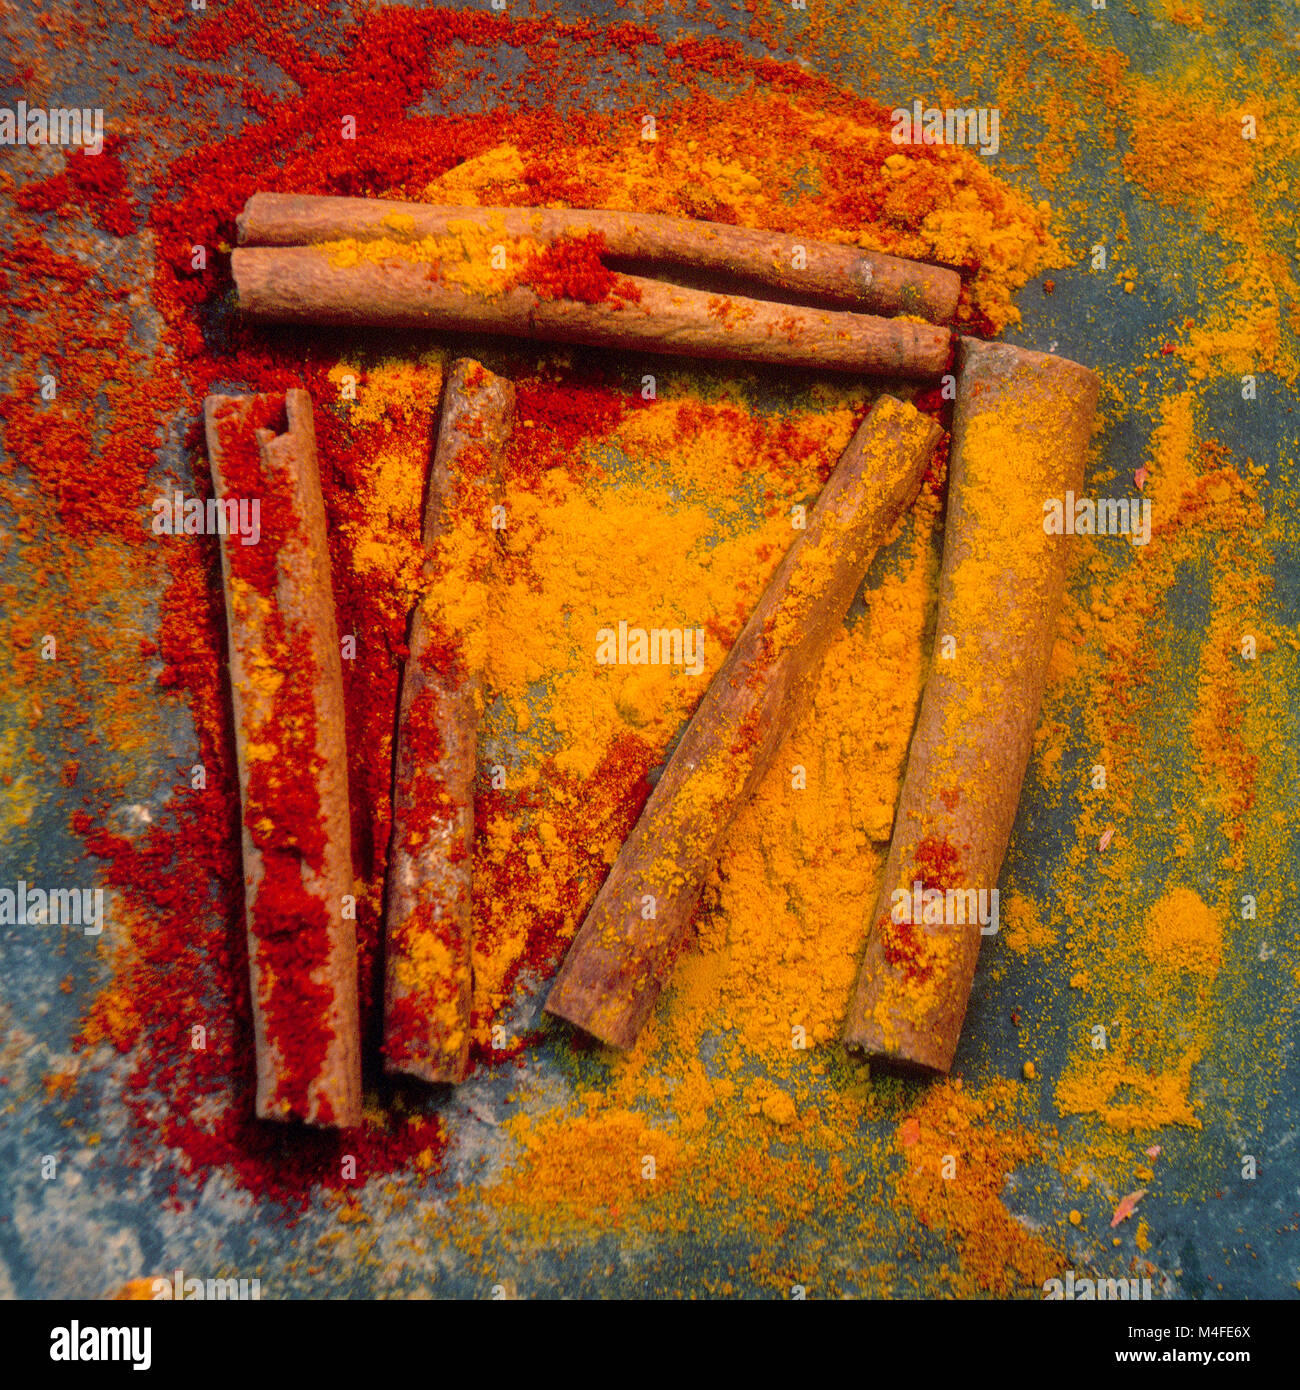 Cinnamon sticks covered with other spices Stock Photo